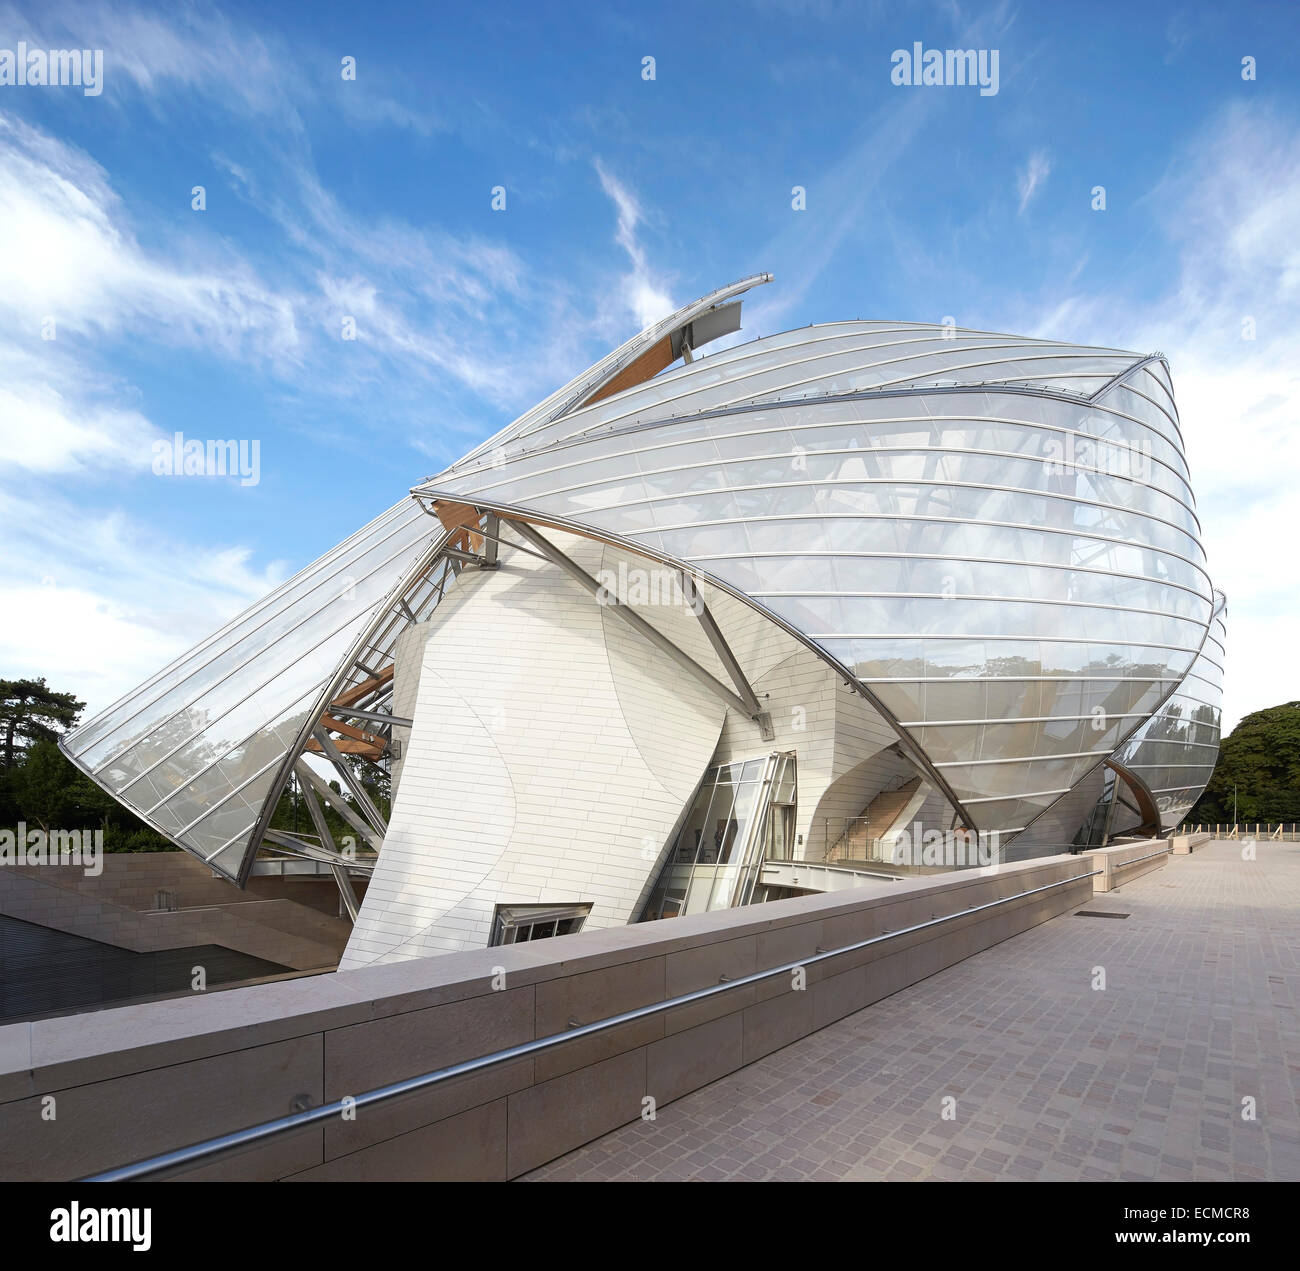 Paris, France - September 26 2018: The Modern Glass Facade Of The Building  Of Louis Vuitton Foundation Stock Photo, Picture and Royalty Free Image.  Image 143723473.